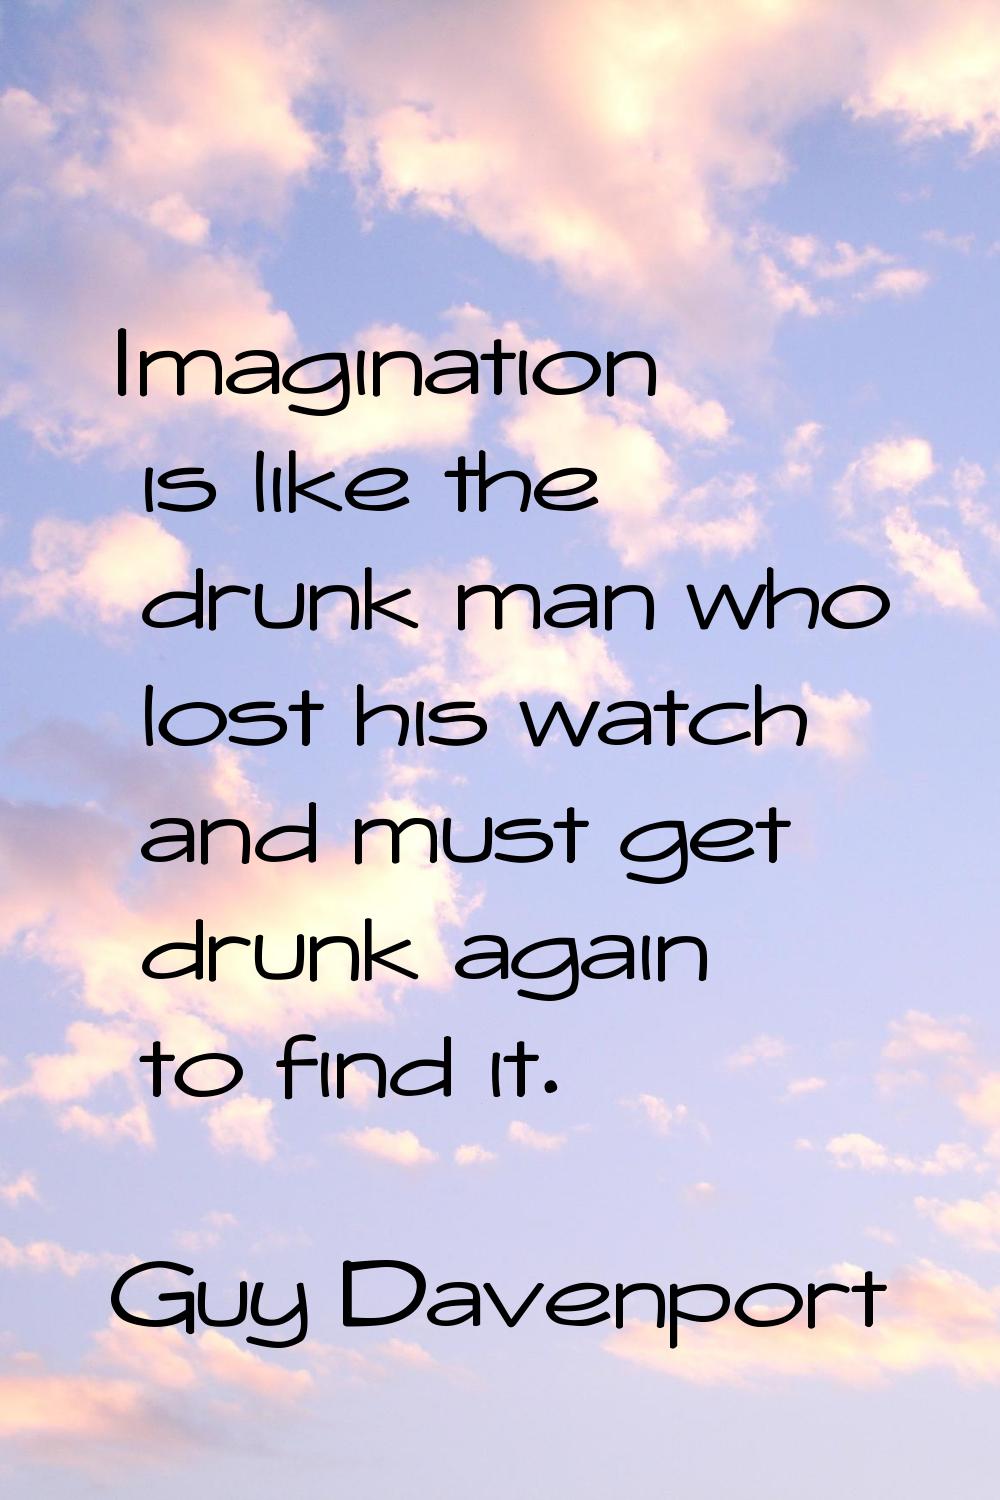 Imagination is like the drunk man who lost his watch and must get drunk again to find it.